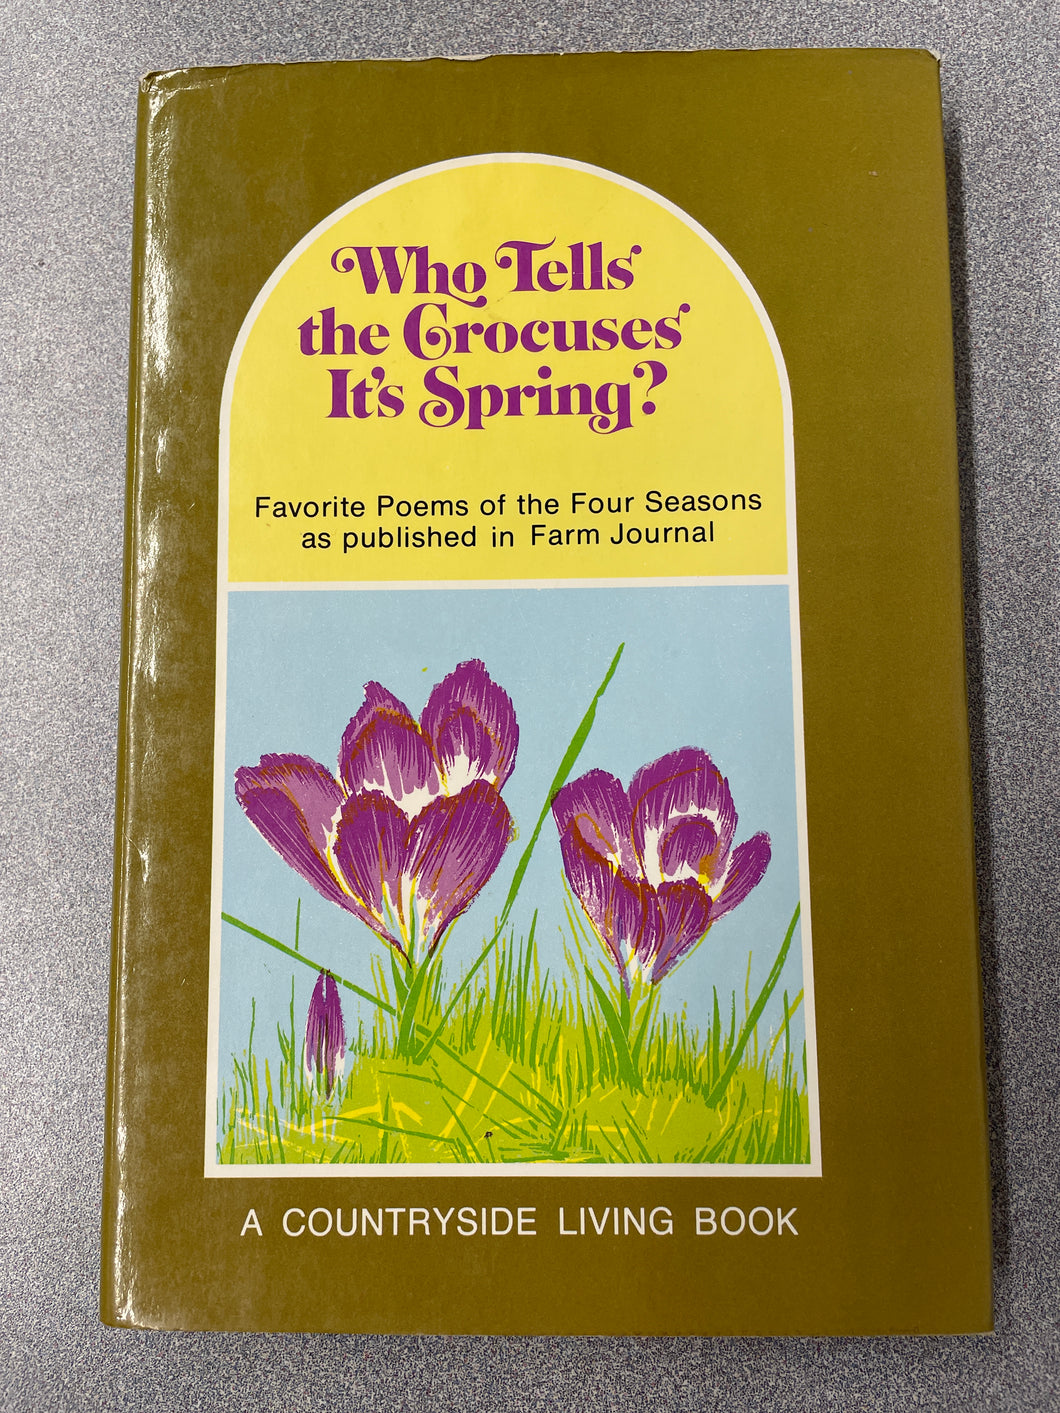 Who Tells the Crocuses It's Spring?: Favorite Poems of the Four Seasons as Published in Farm Journal, Johnson, Pearl Patterson, ed.  [1971] P 4/24